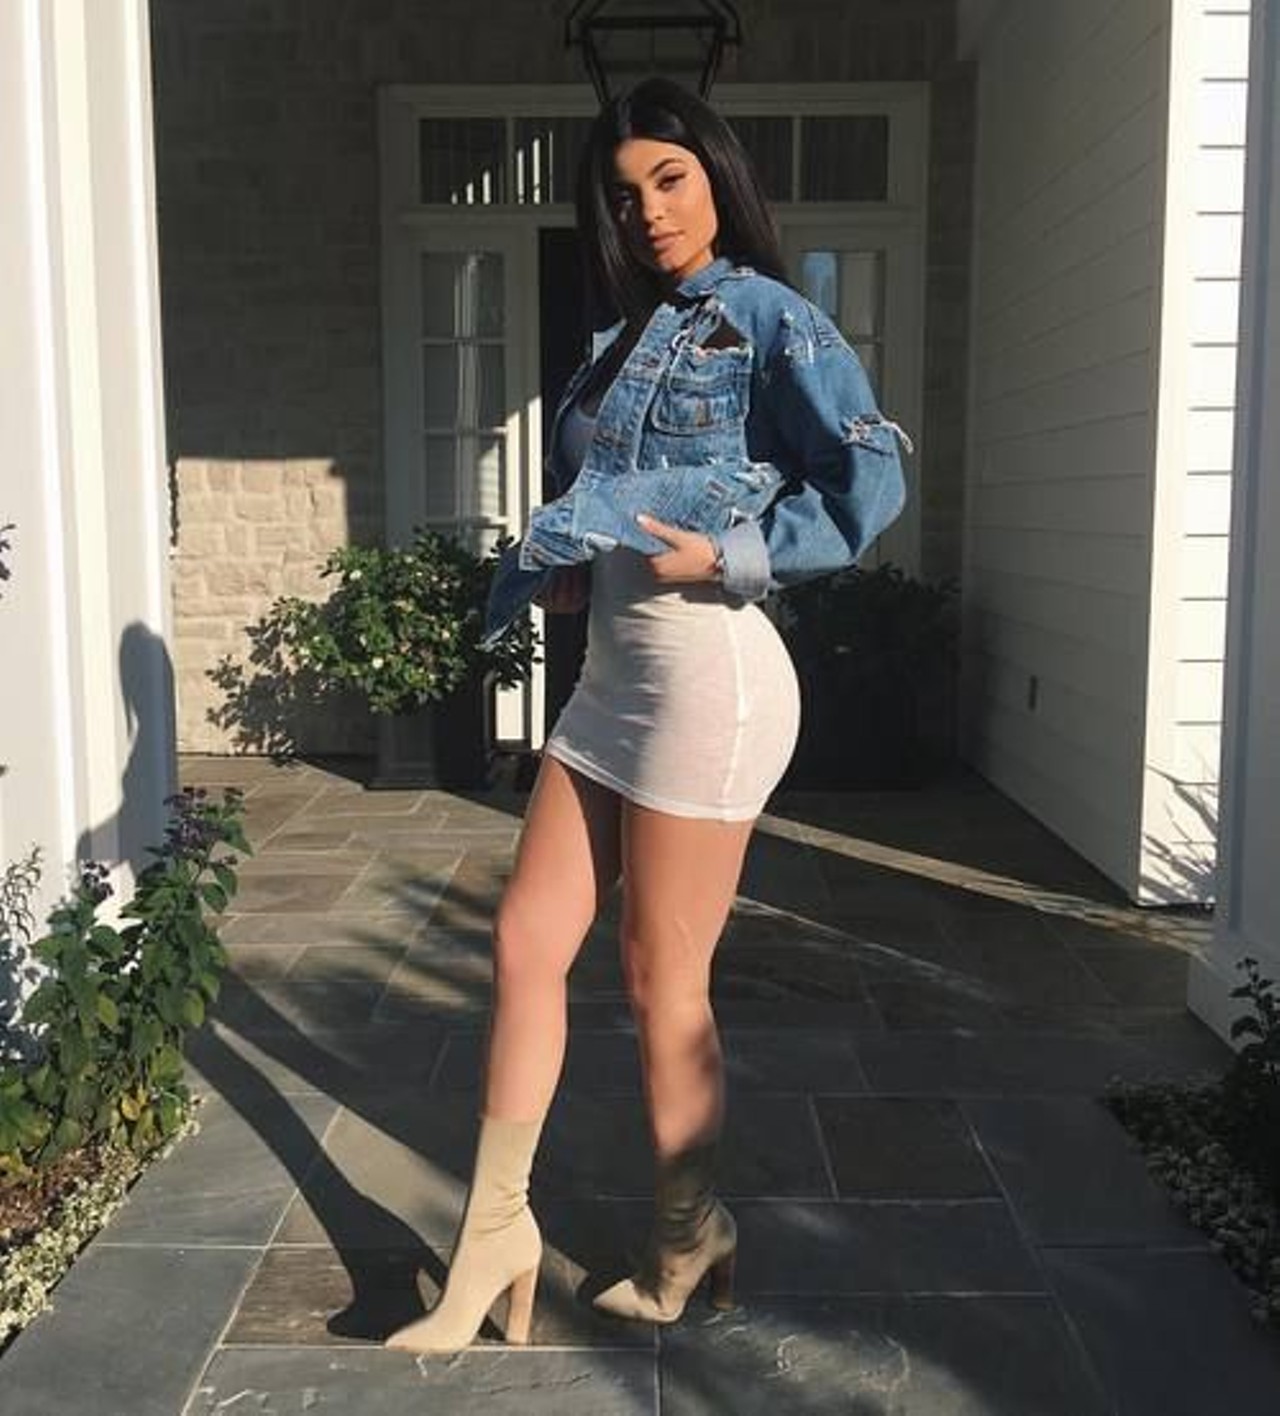 To be the queen of snapchat &#151; Kylie Jenner &#151; you need a jean jacket, a white body-con dress and some fake  &#147;Yeezy&#148; boots like  these Photo courtesy of Instagram 